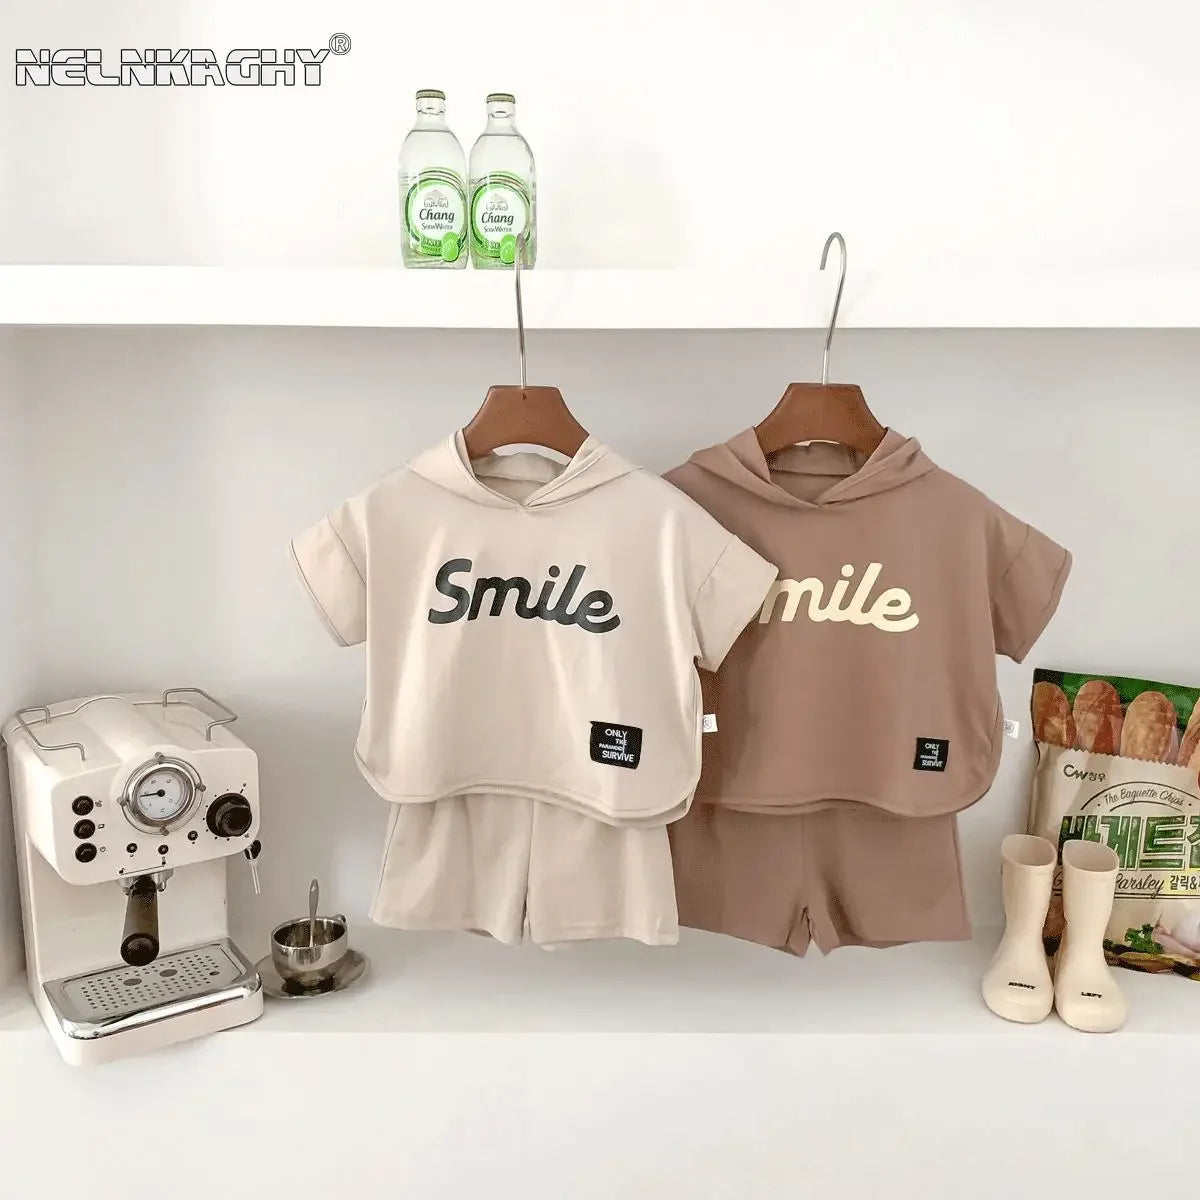 Boys Beige Hooded T shirt 'Smile' and matching shorts